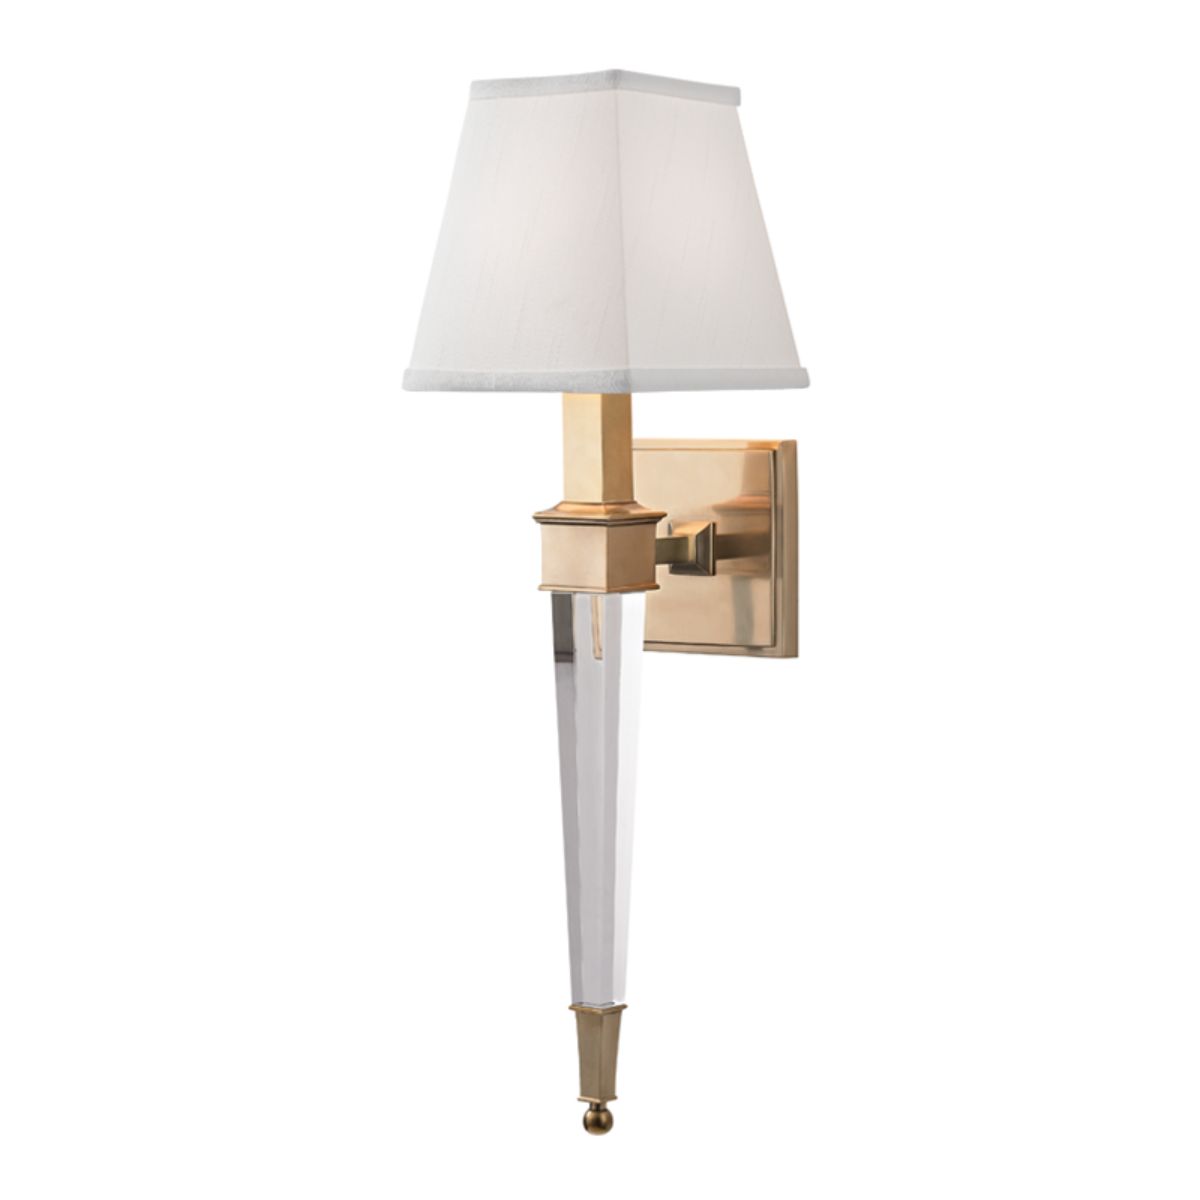 Ruskin 21 in. Armed Sconce